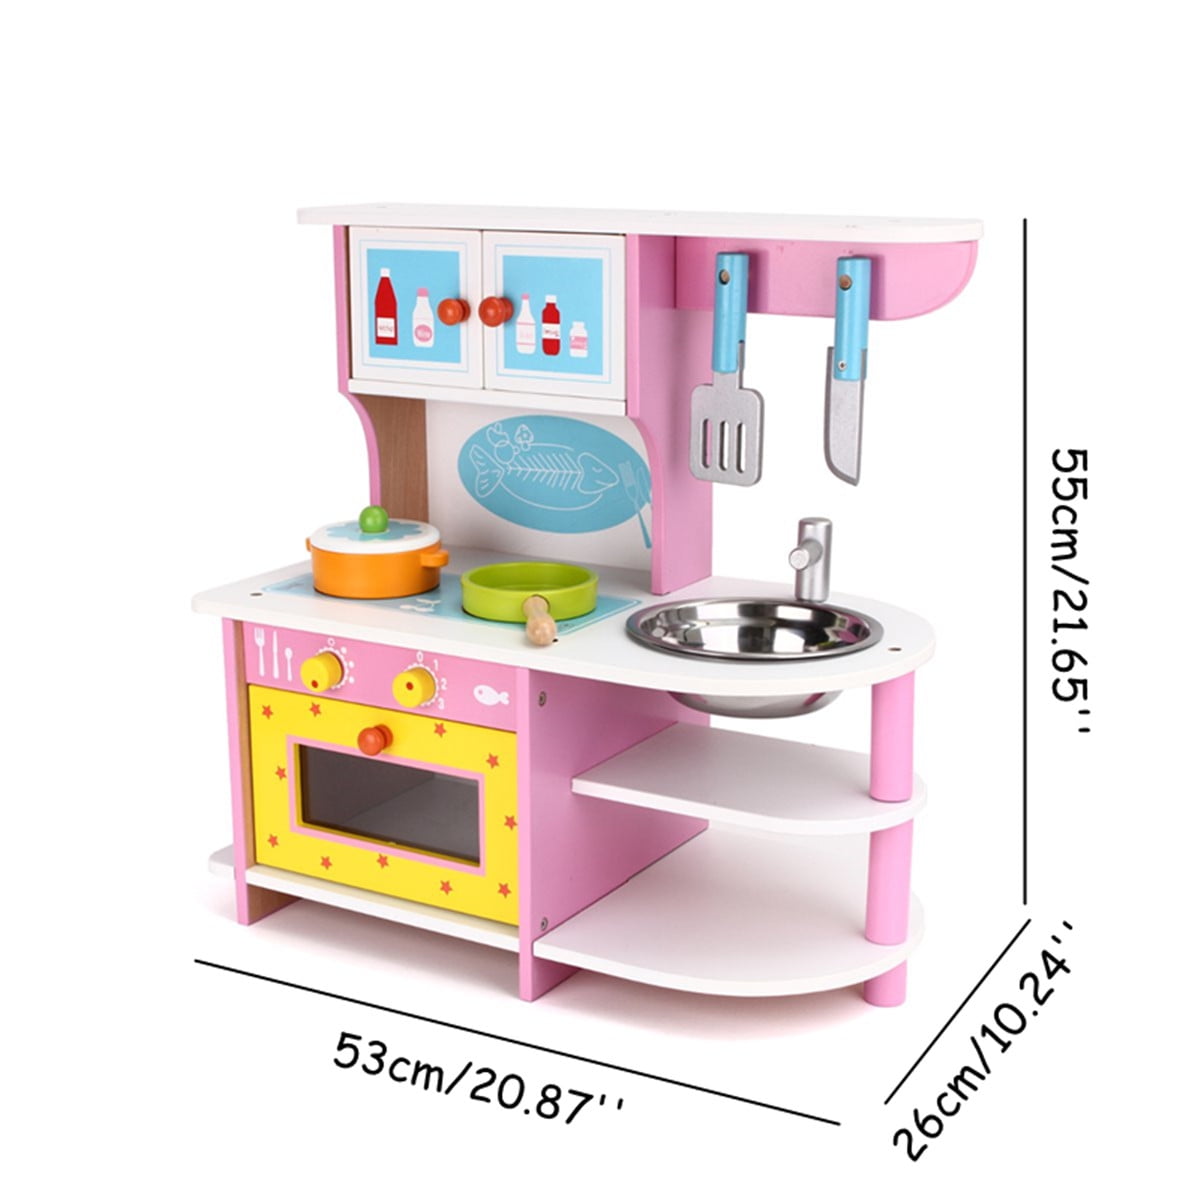 Large Kids Home Kitchen Playset Toy Pretend Play Kitchen Cooking with Play Kitchen Accessories